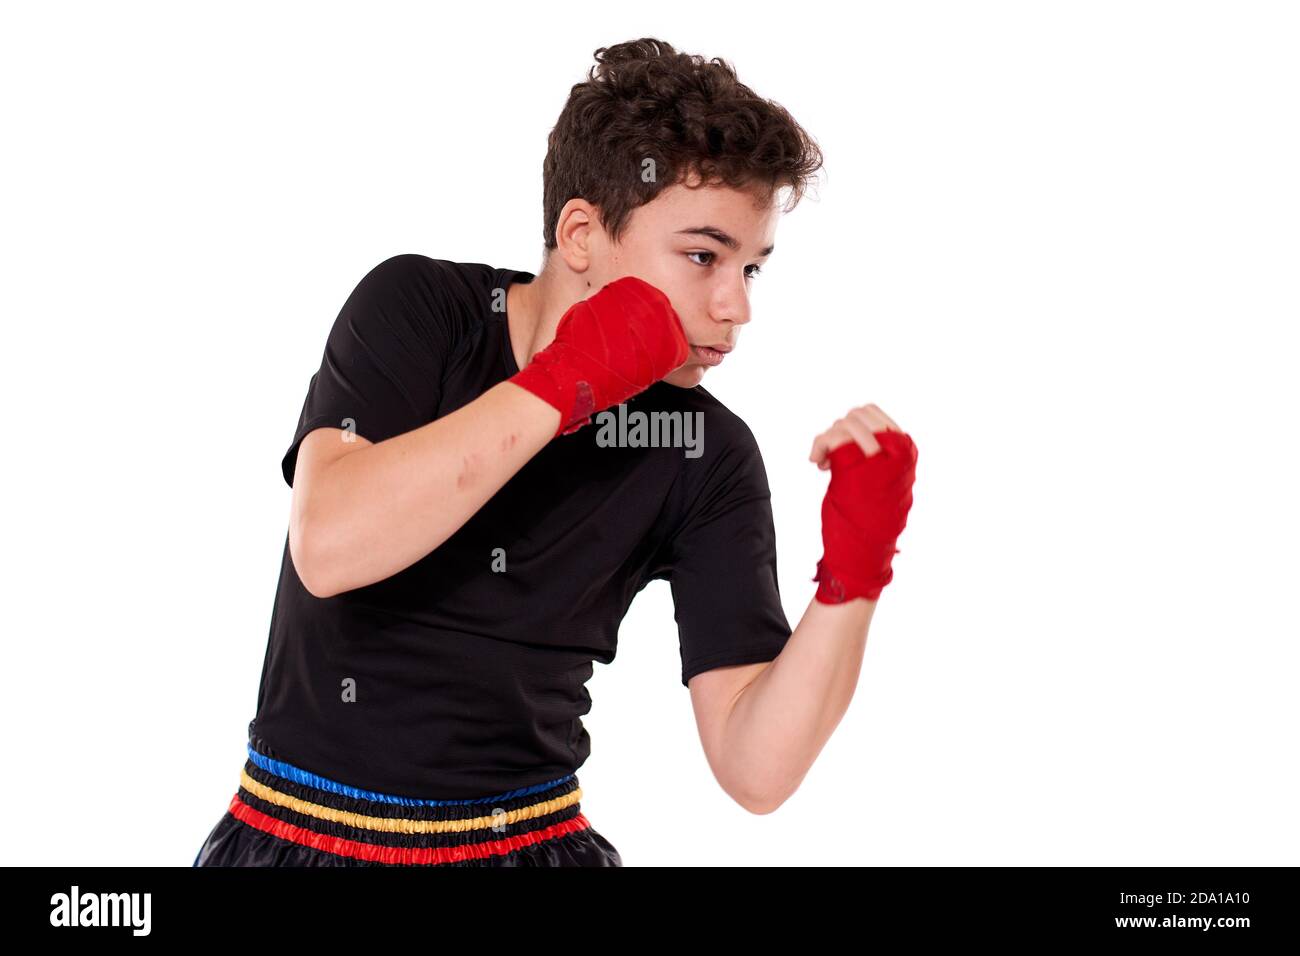 Young kickboxer training shadow boxing, isolated on white background ...